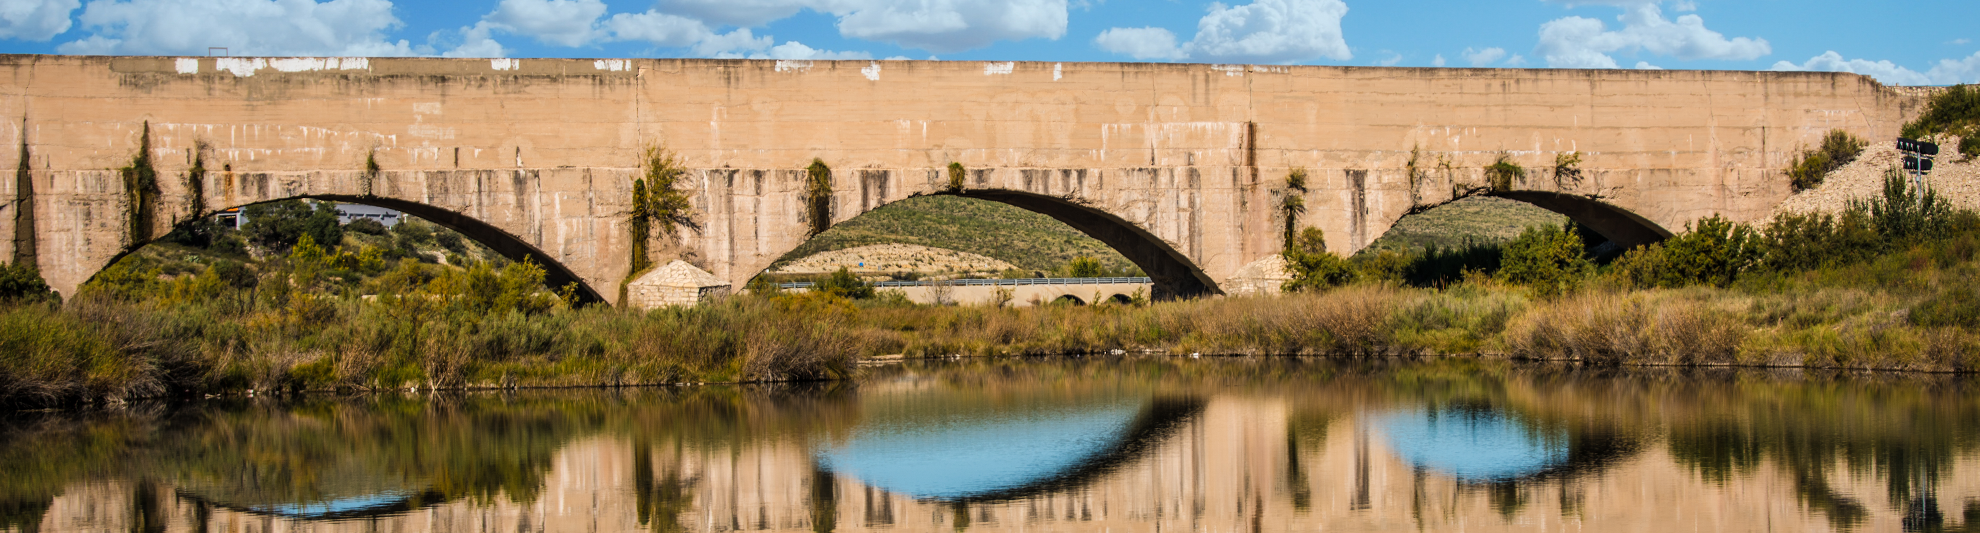 image of carlsbad pecos river flume